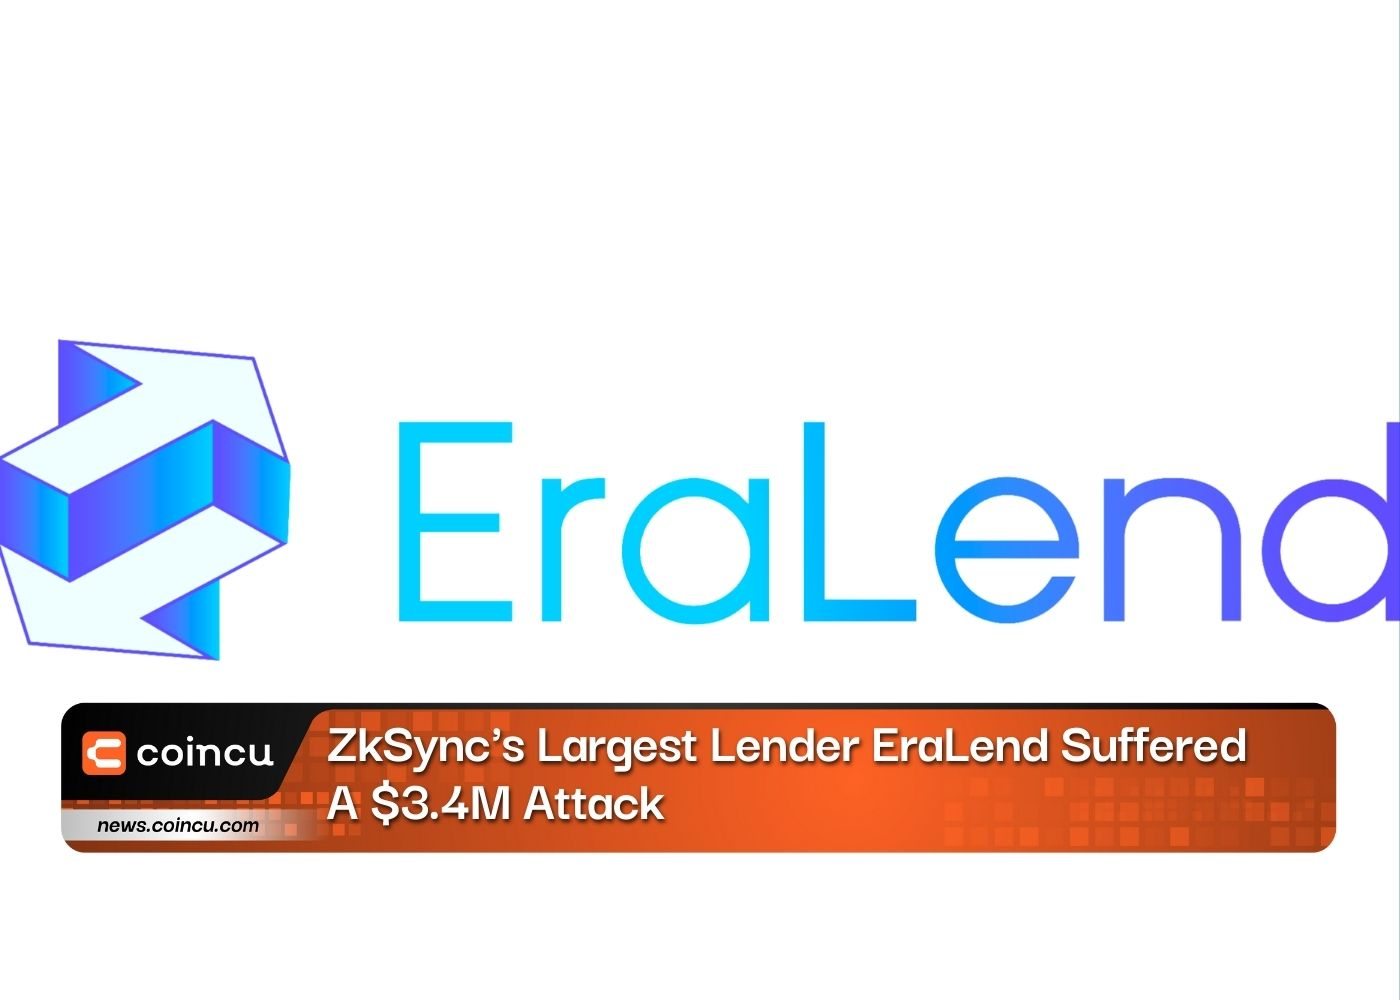 ZkSync's Largest Lender EraLend Suffered A $3.4M Attack